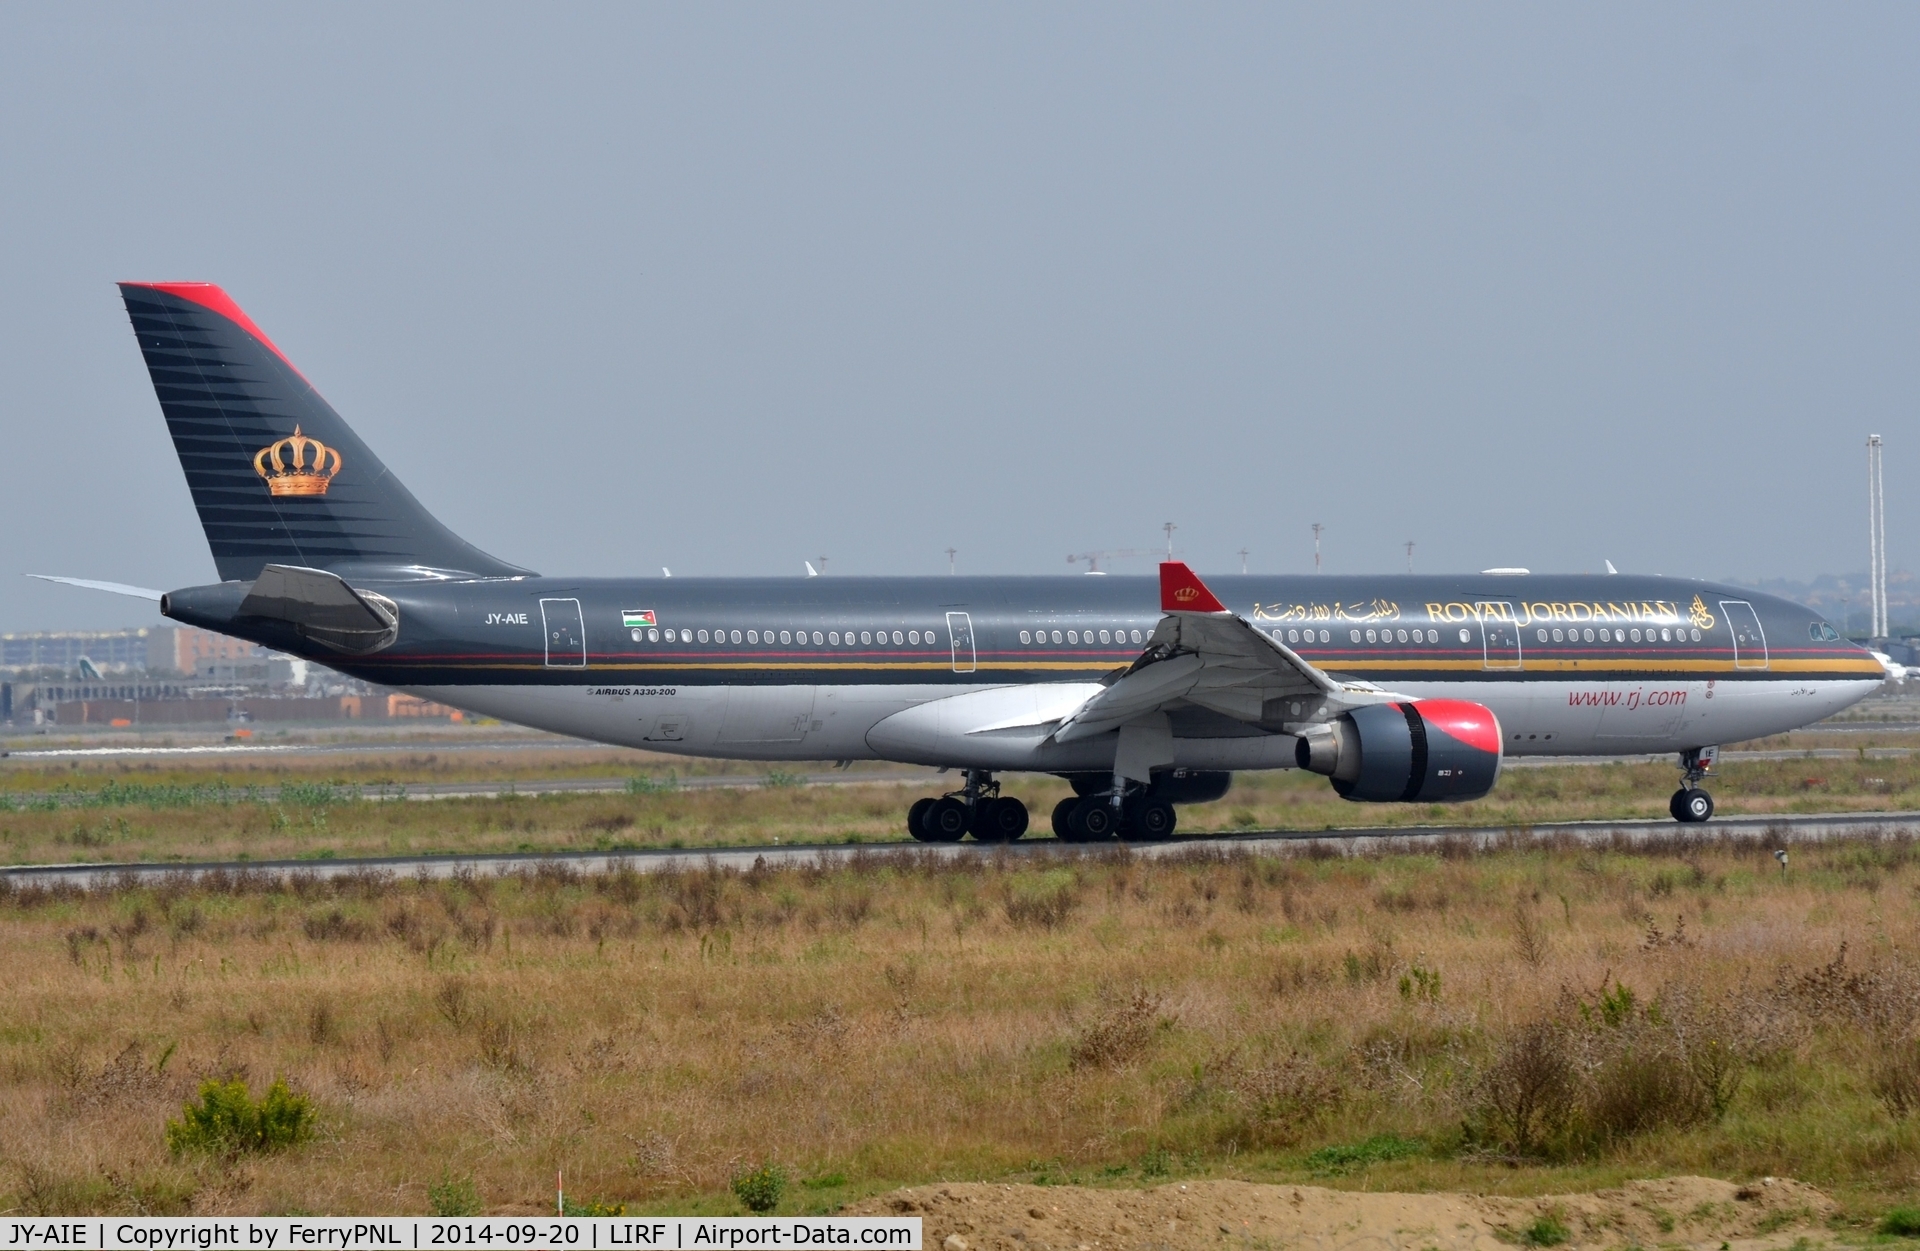 JY-AIE, 2008 Airbus A330-223 C/N 970, Jordanian A332 arriving in FCO